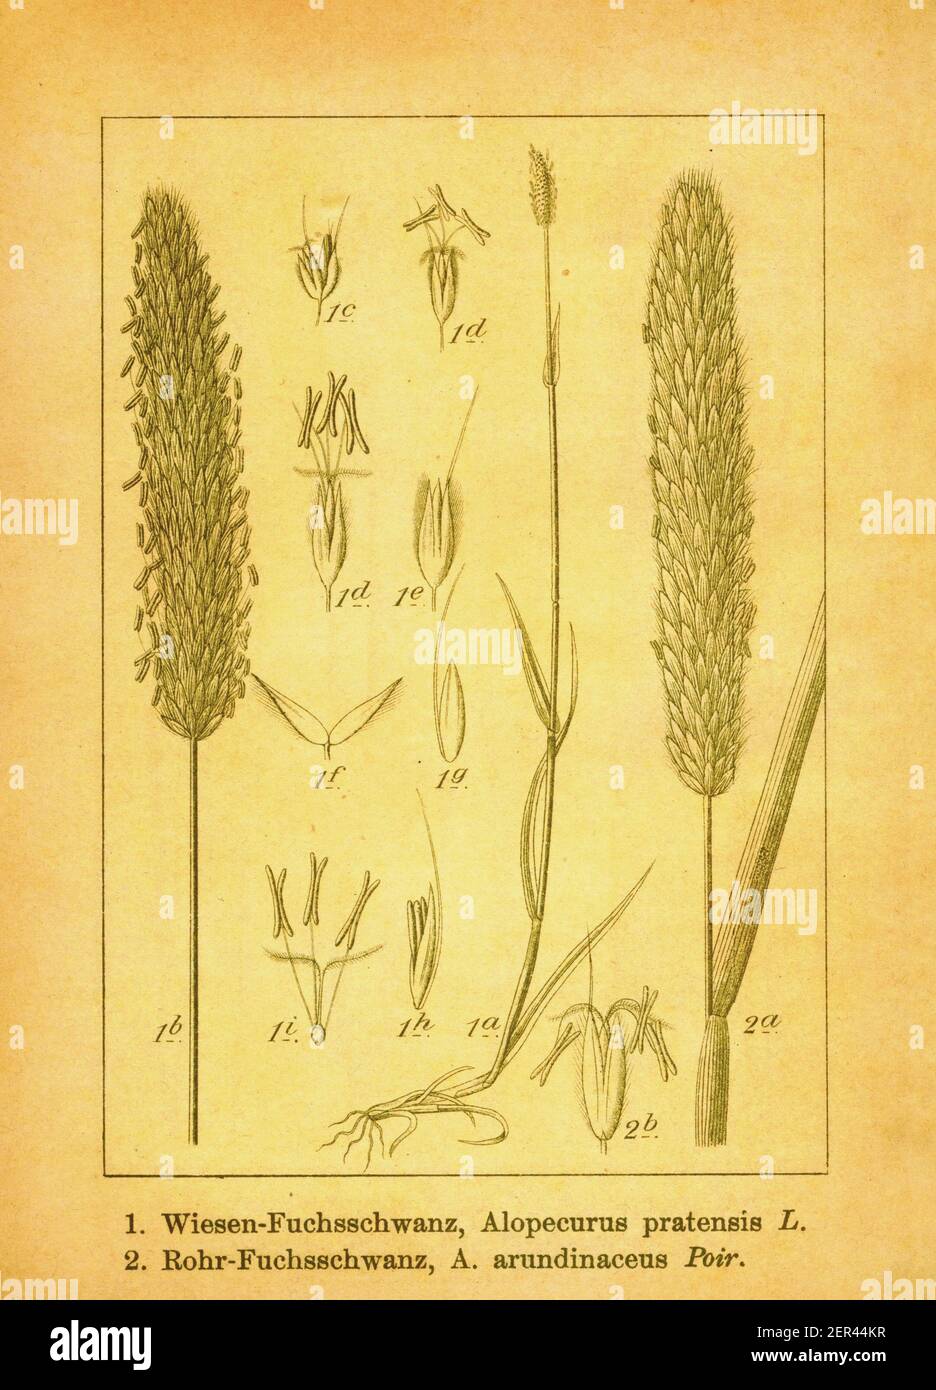 Antique illustration of meadow foxtail and creeping meadow foxtail. Engraving by Jacob Sturm (1771-1848) from the book Deutschlands Flora in Abbildung Stock Photo